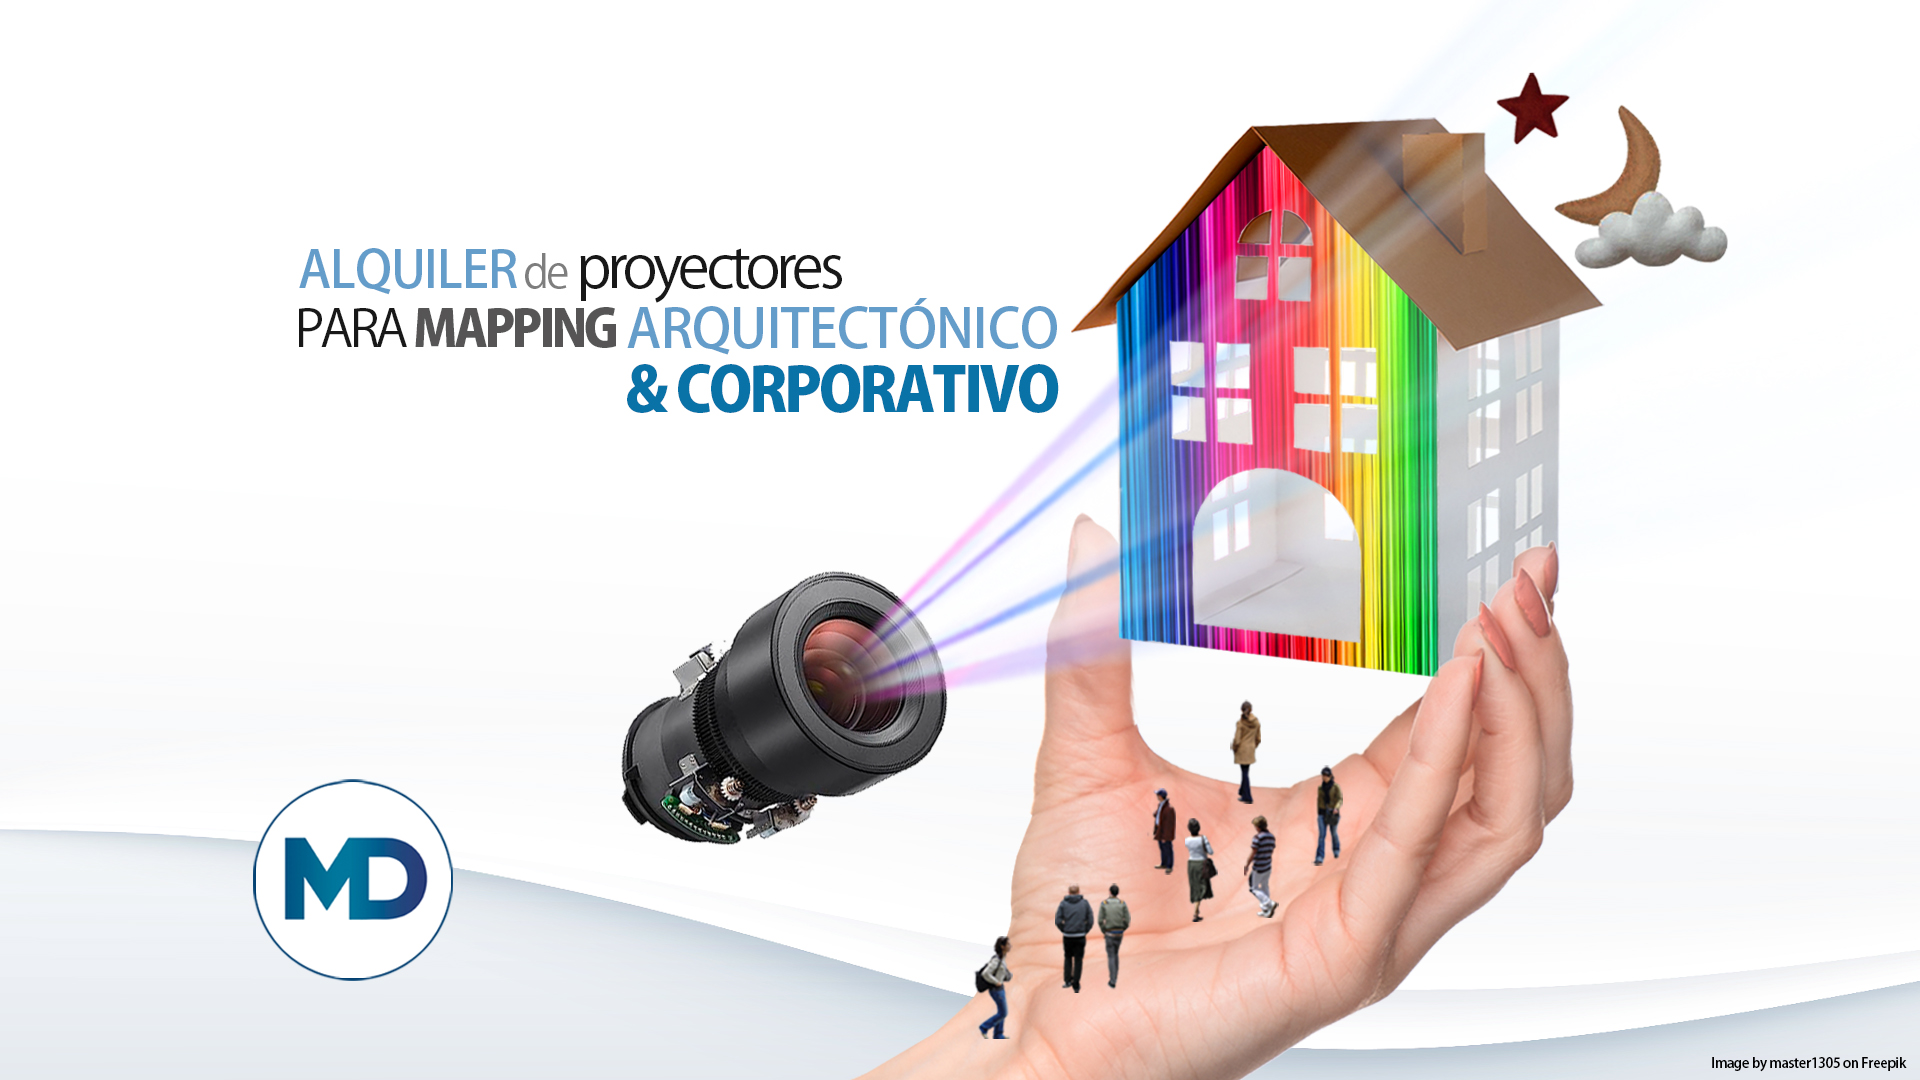 Video projector rental for corporate and architectural mapping   